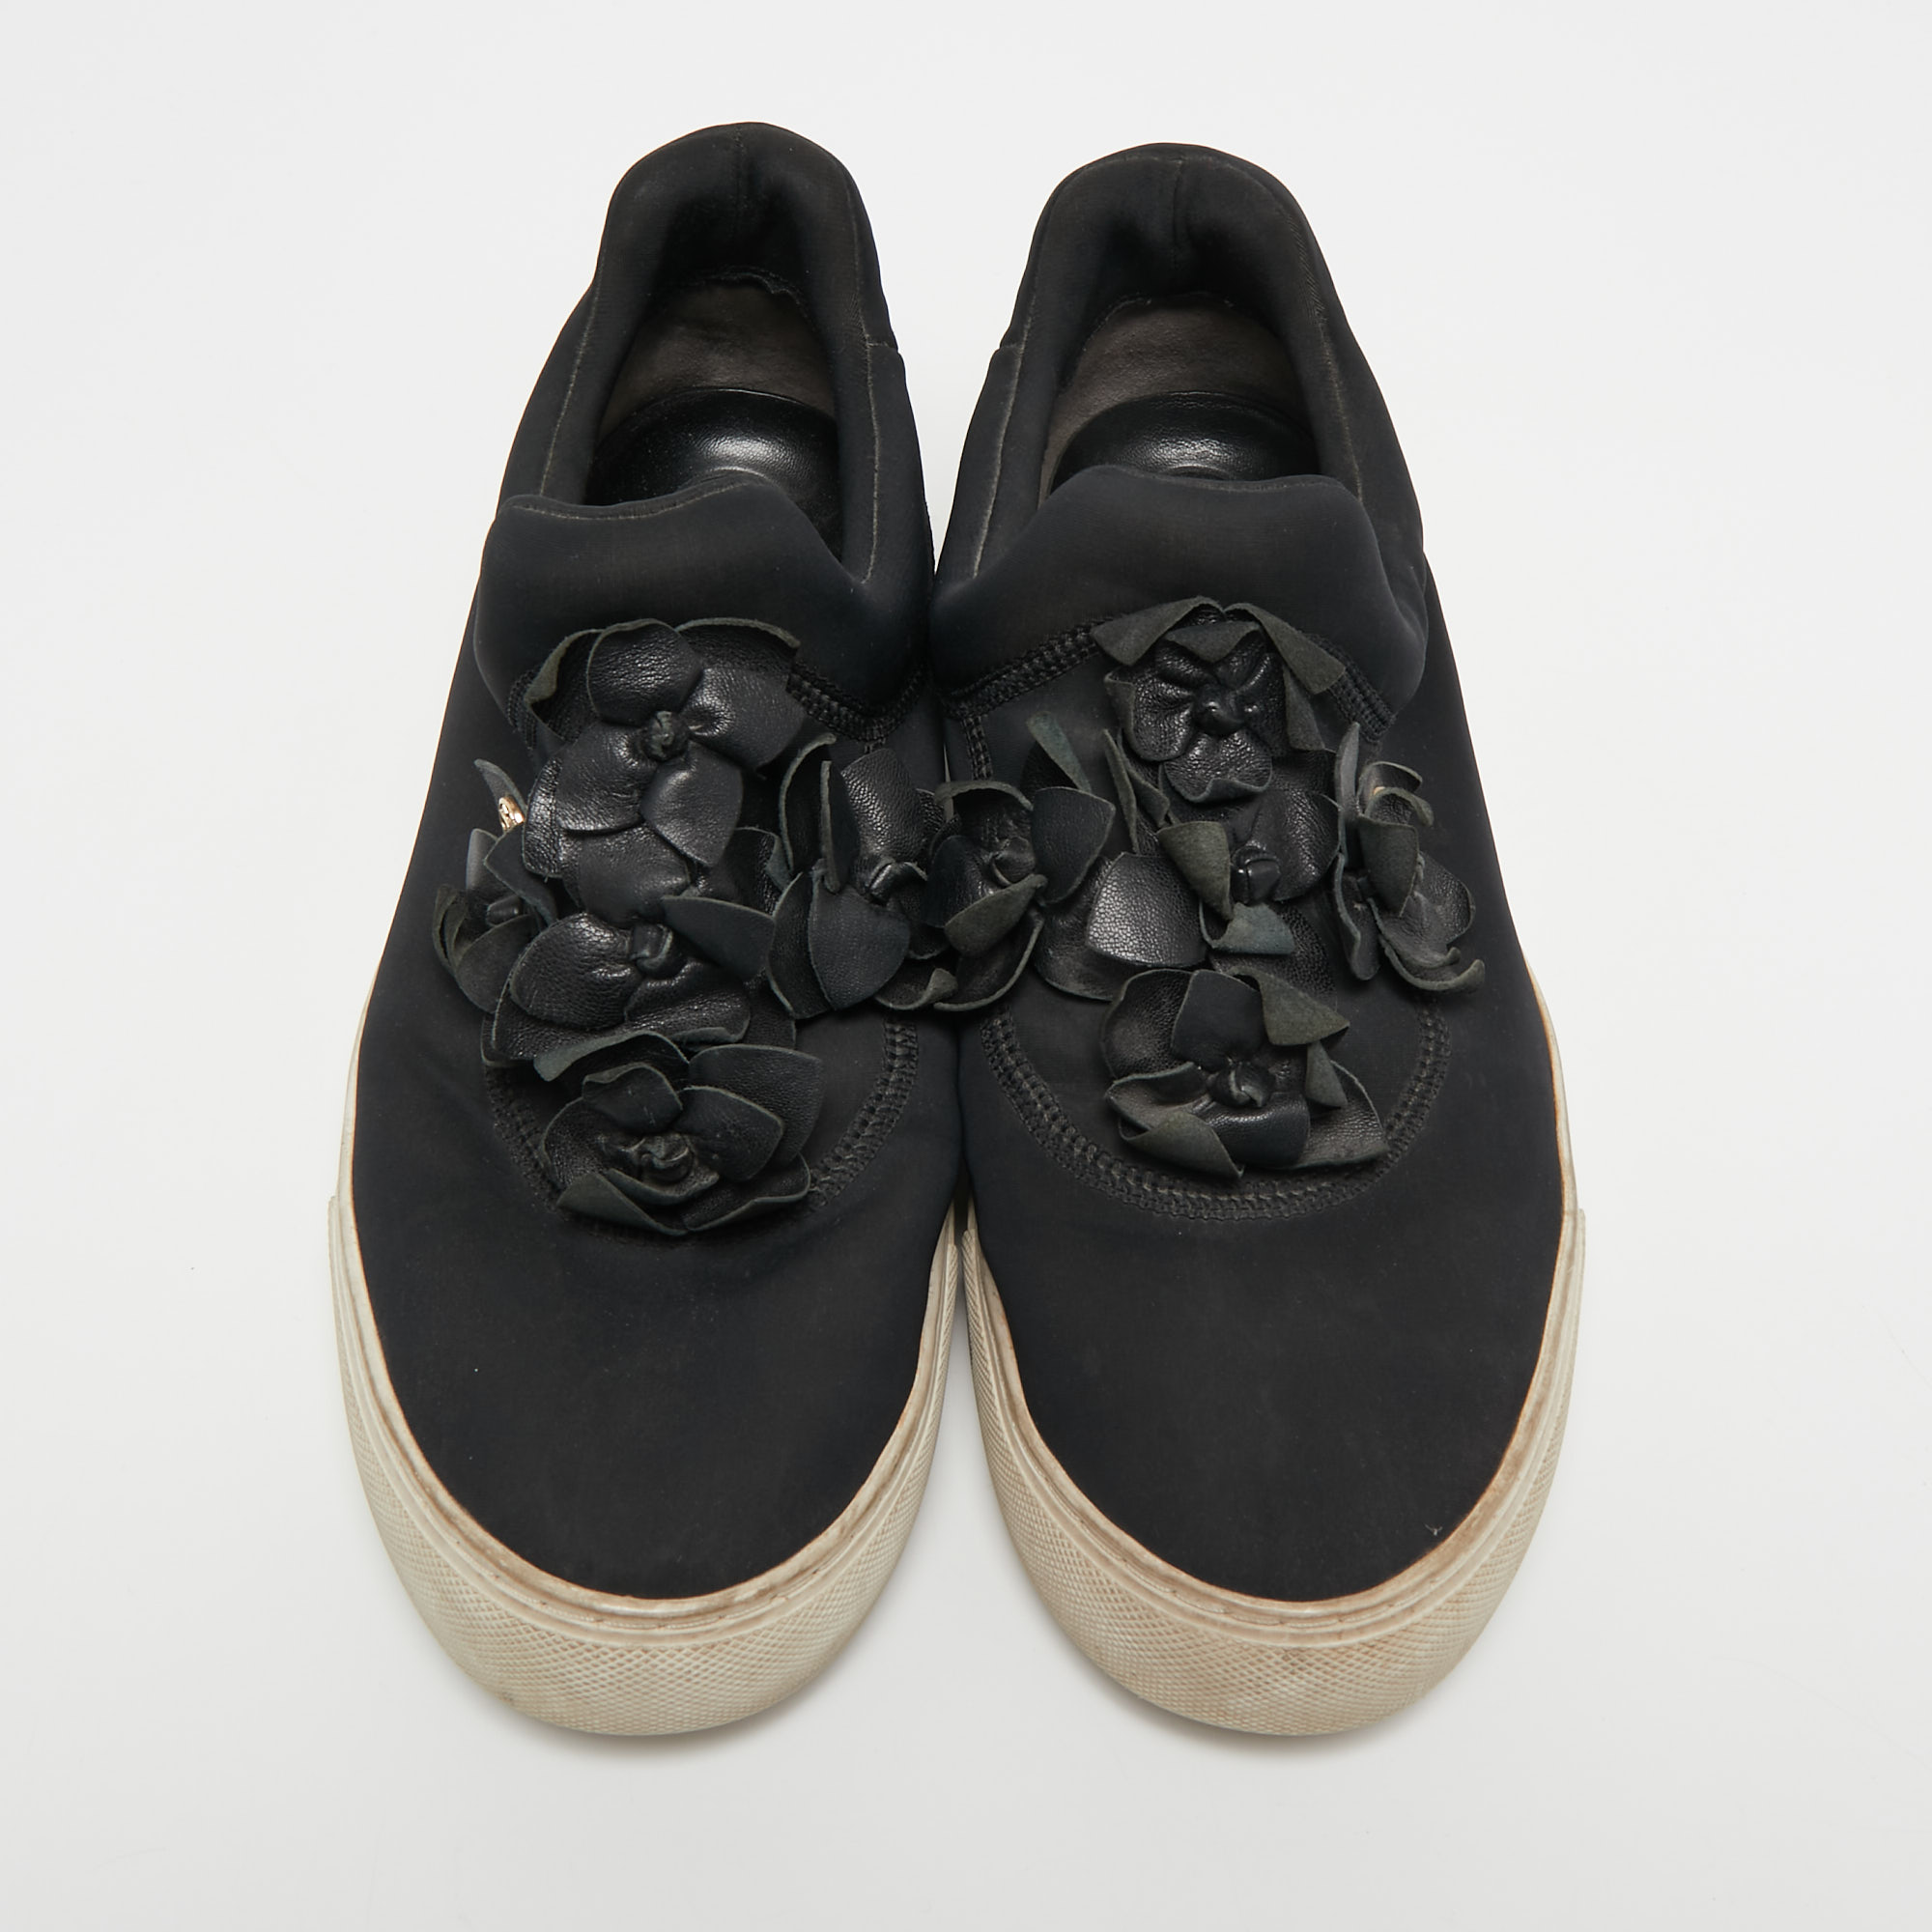 Tory Burch Black Neoprene And Leather Blossom Applique Slip On Sneakers Size 40.5